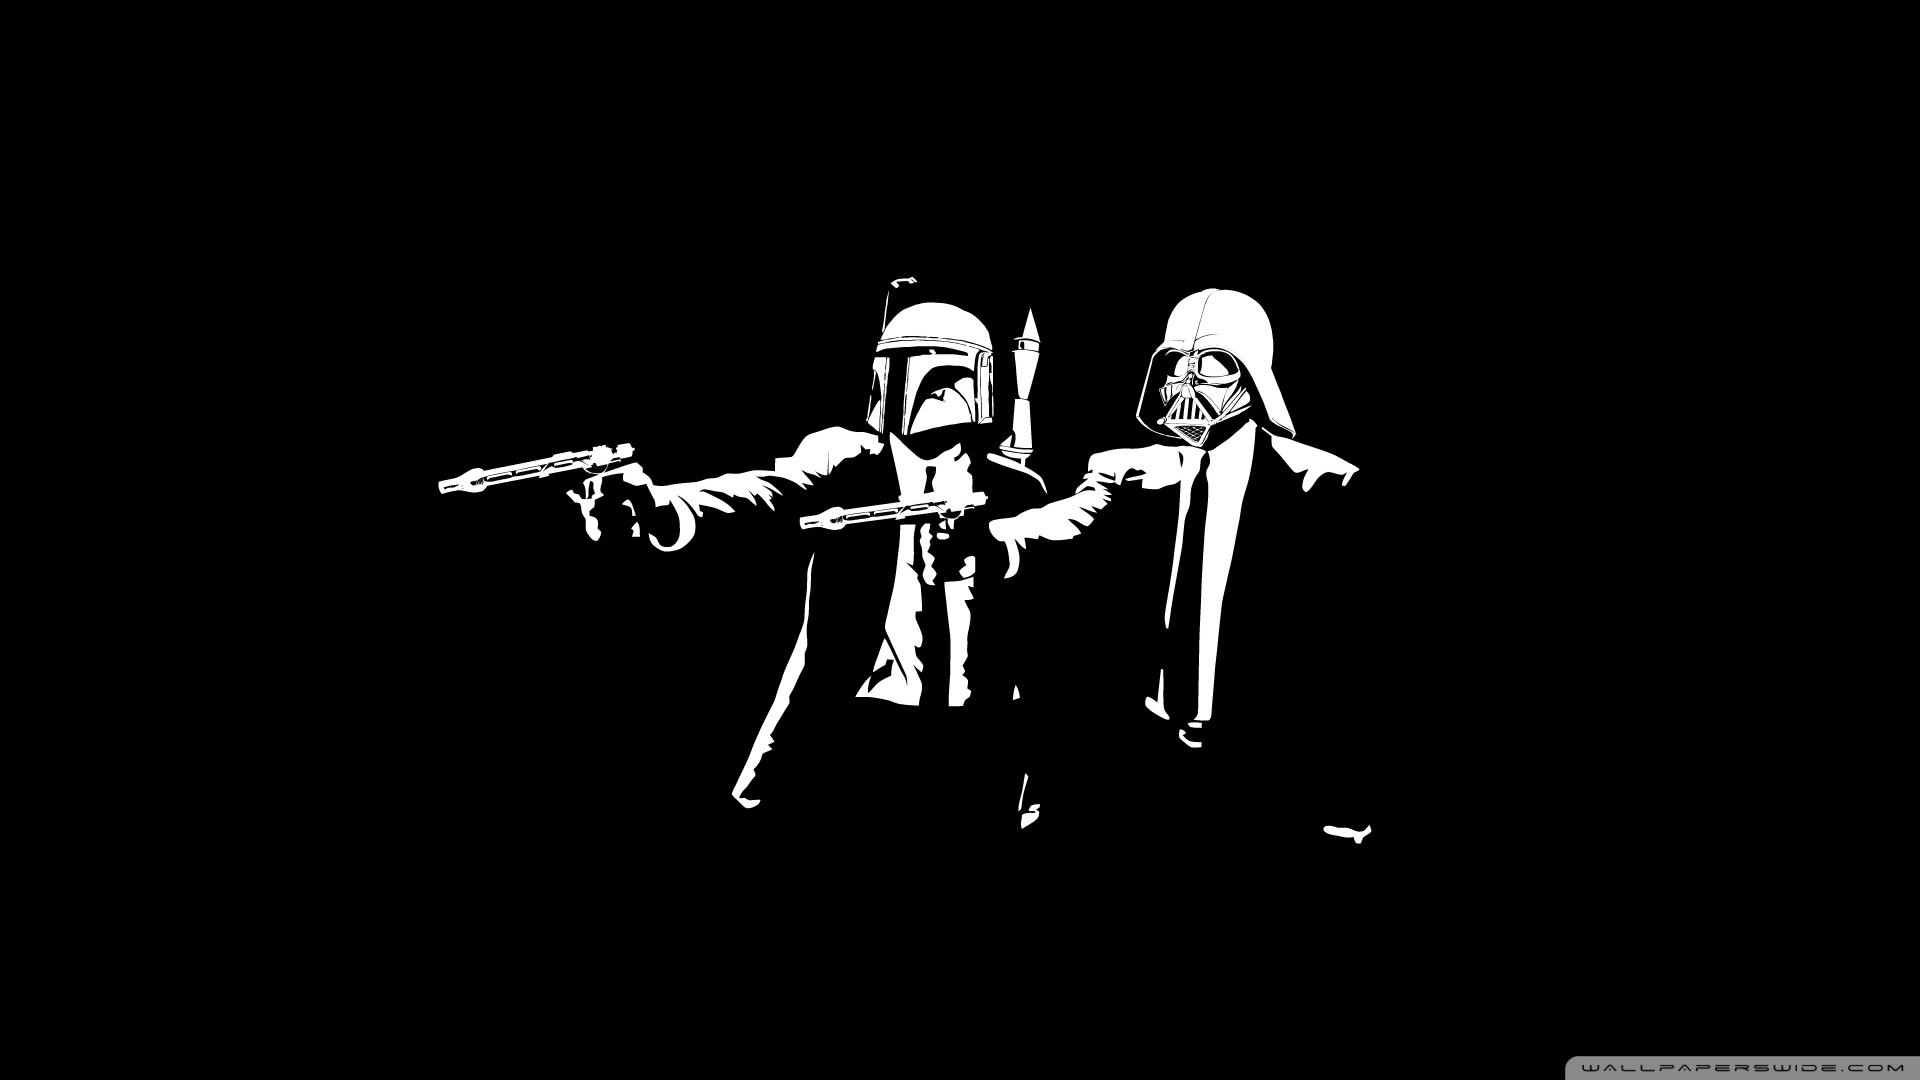 1920x1080 10 Top And Most Recent Star Wars Pulp Fiction Wallpaper for Desktop with  FULL HD 1080p (1920 Ã 1080) FREE DOWNLOAD